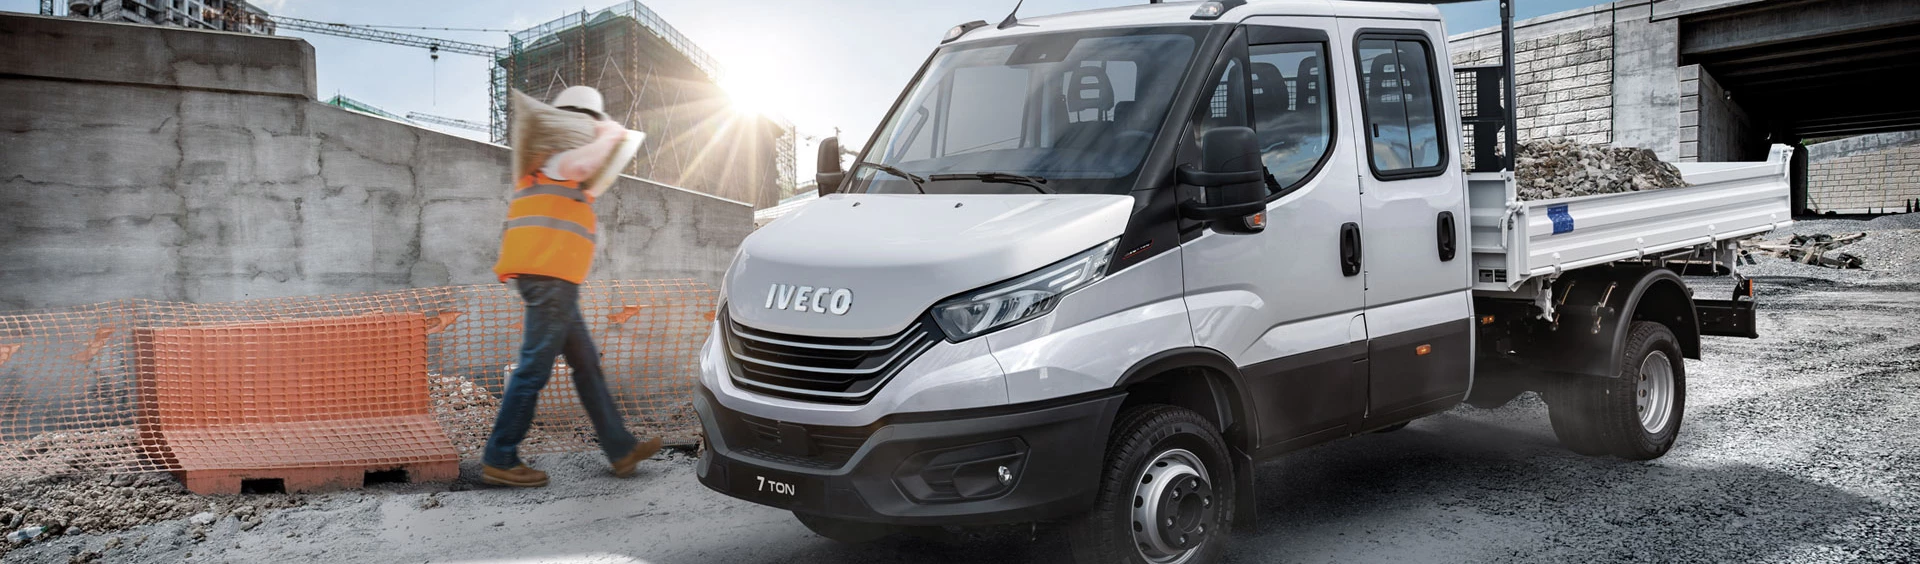 Iveco Daily 7Ton Gallery 3